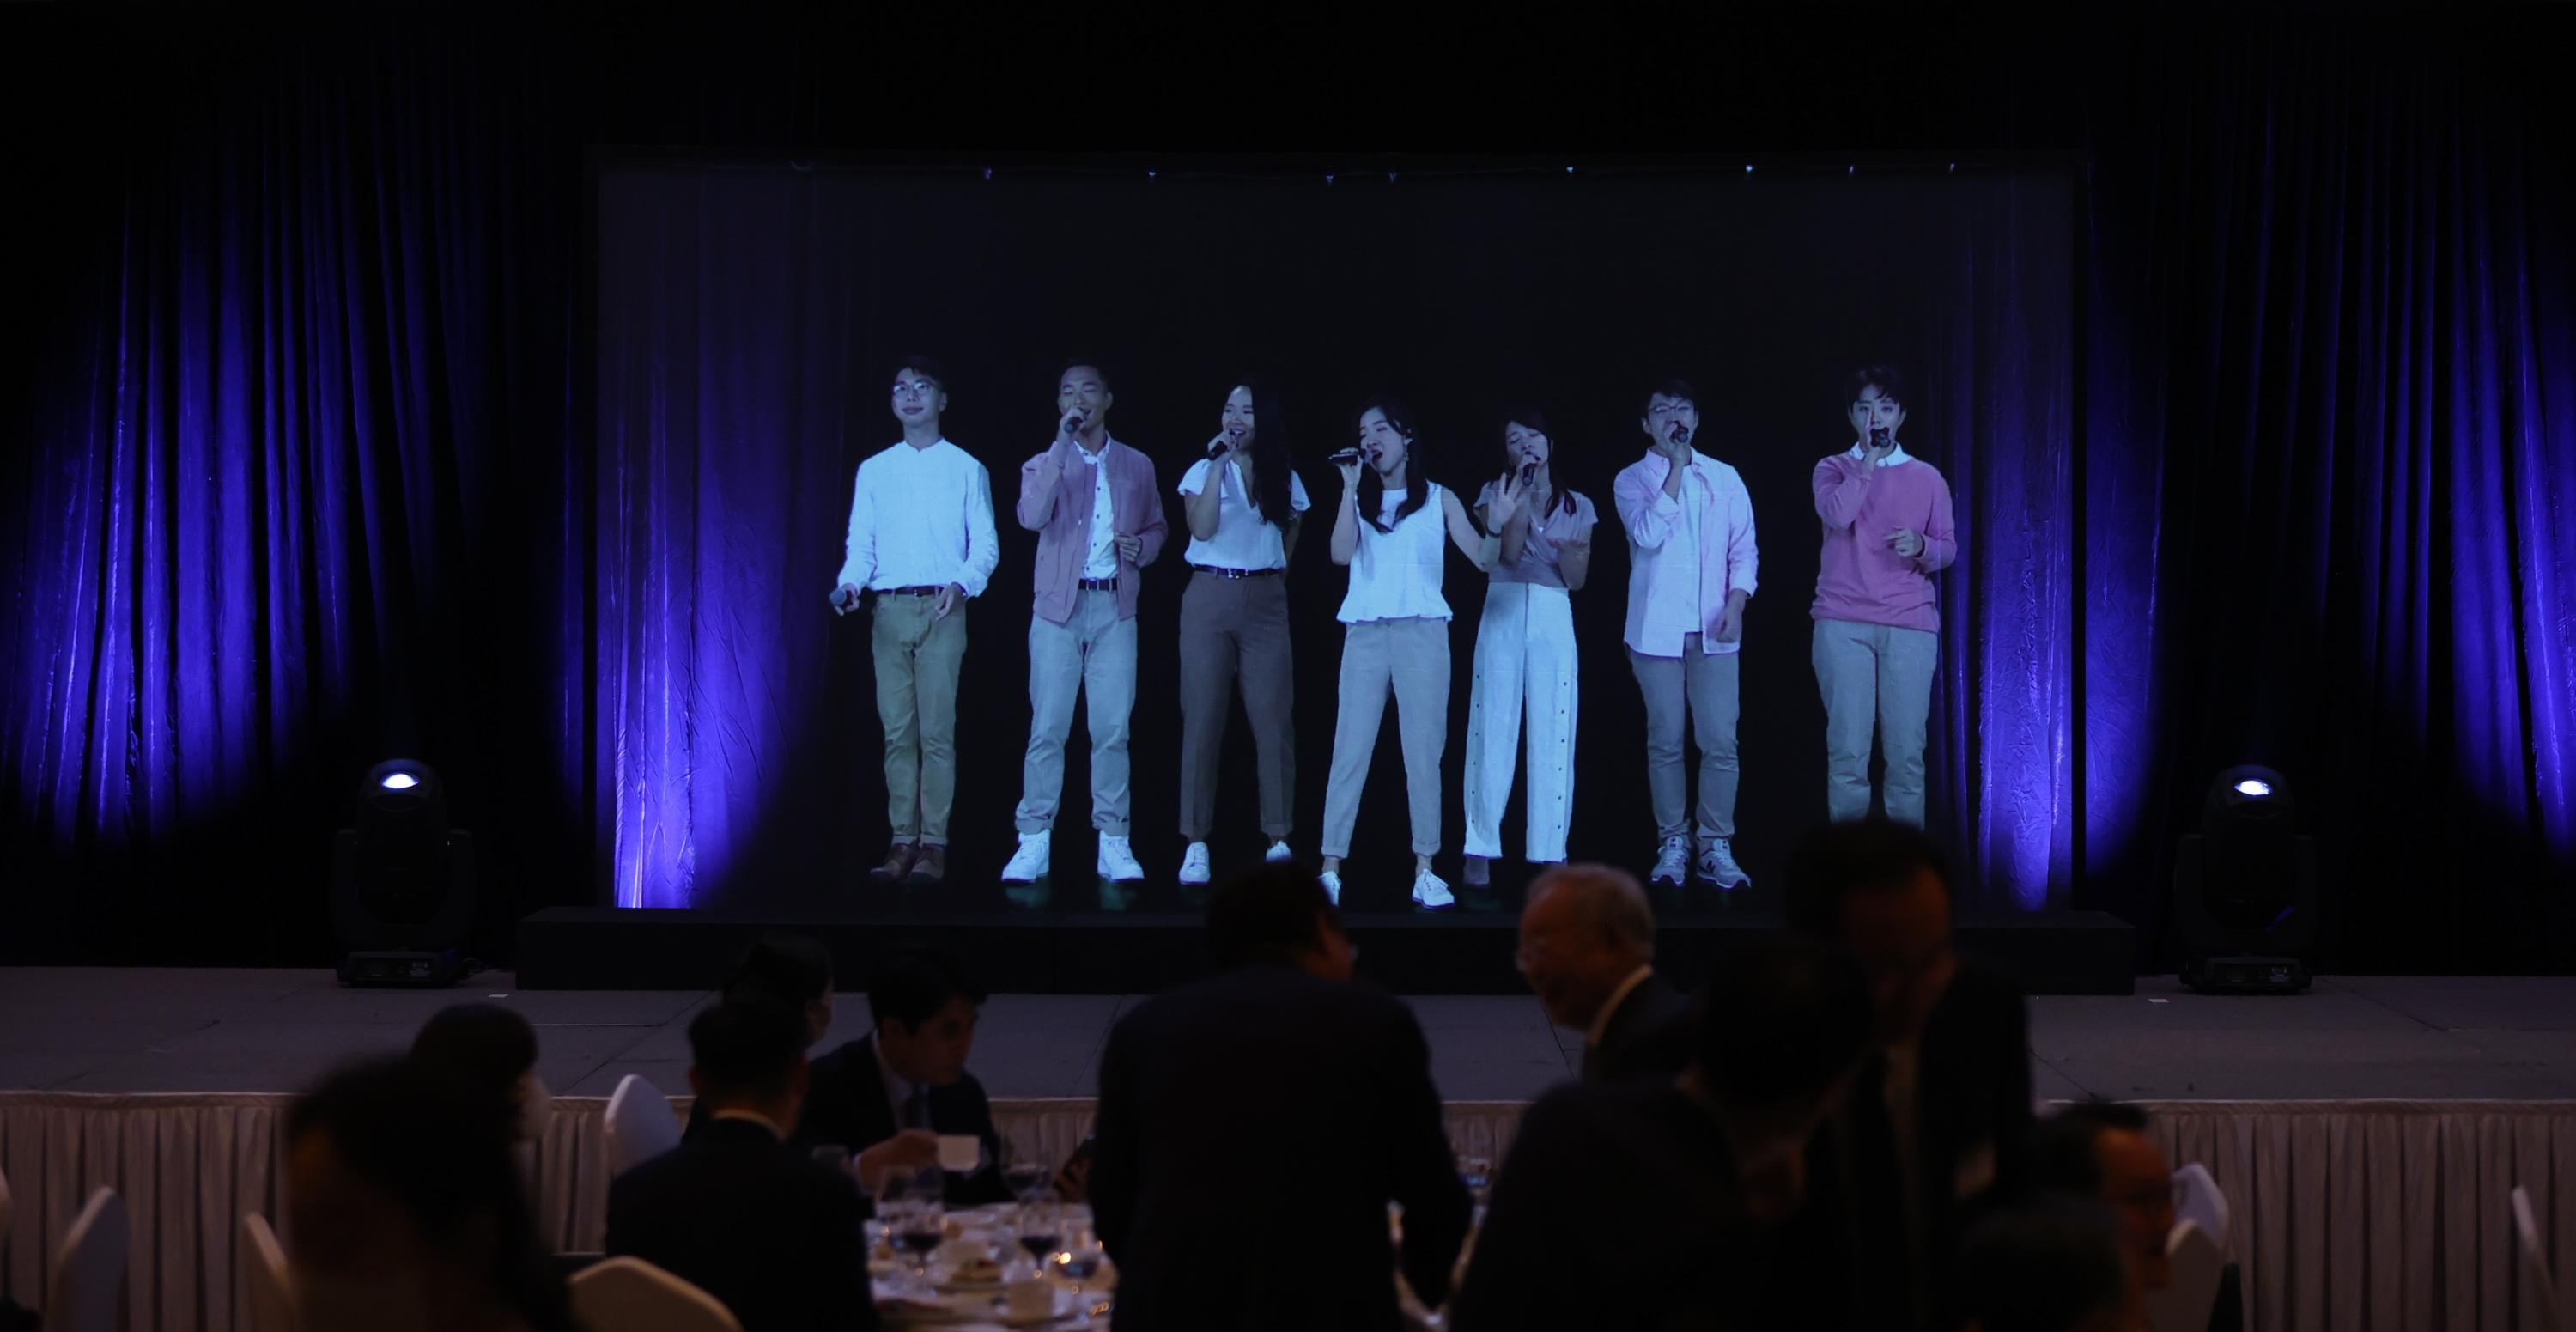 The Hong Kong Economic and Trade Office in Tokyo organised a gala dinner in Seoul, Korea, today (September 22) to celebrate the 25th anniversary of the establishment of the Hong Kong Special Administrative Region. Through hologram technology, the Hong Kong Federation of Youth Groups presented a live a cappella performance from Hong Kong for the gala dinner.